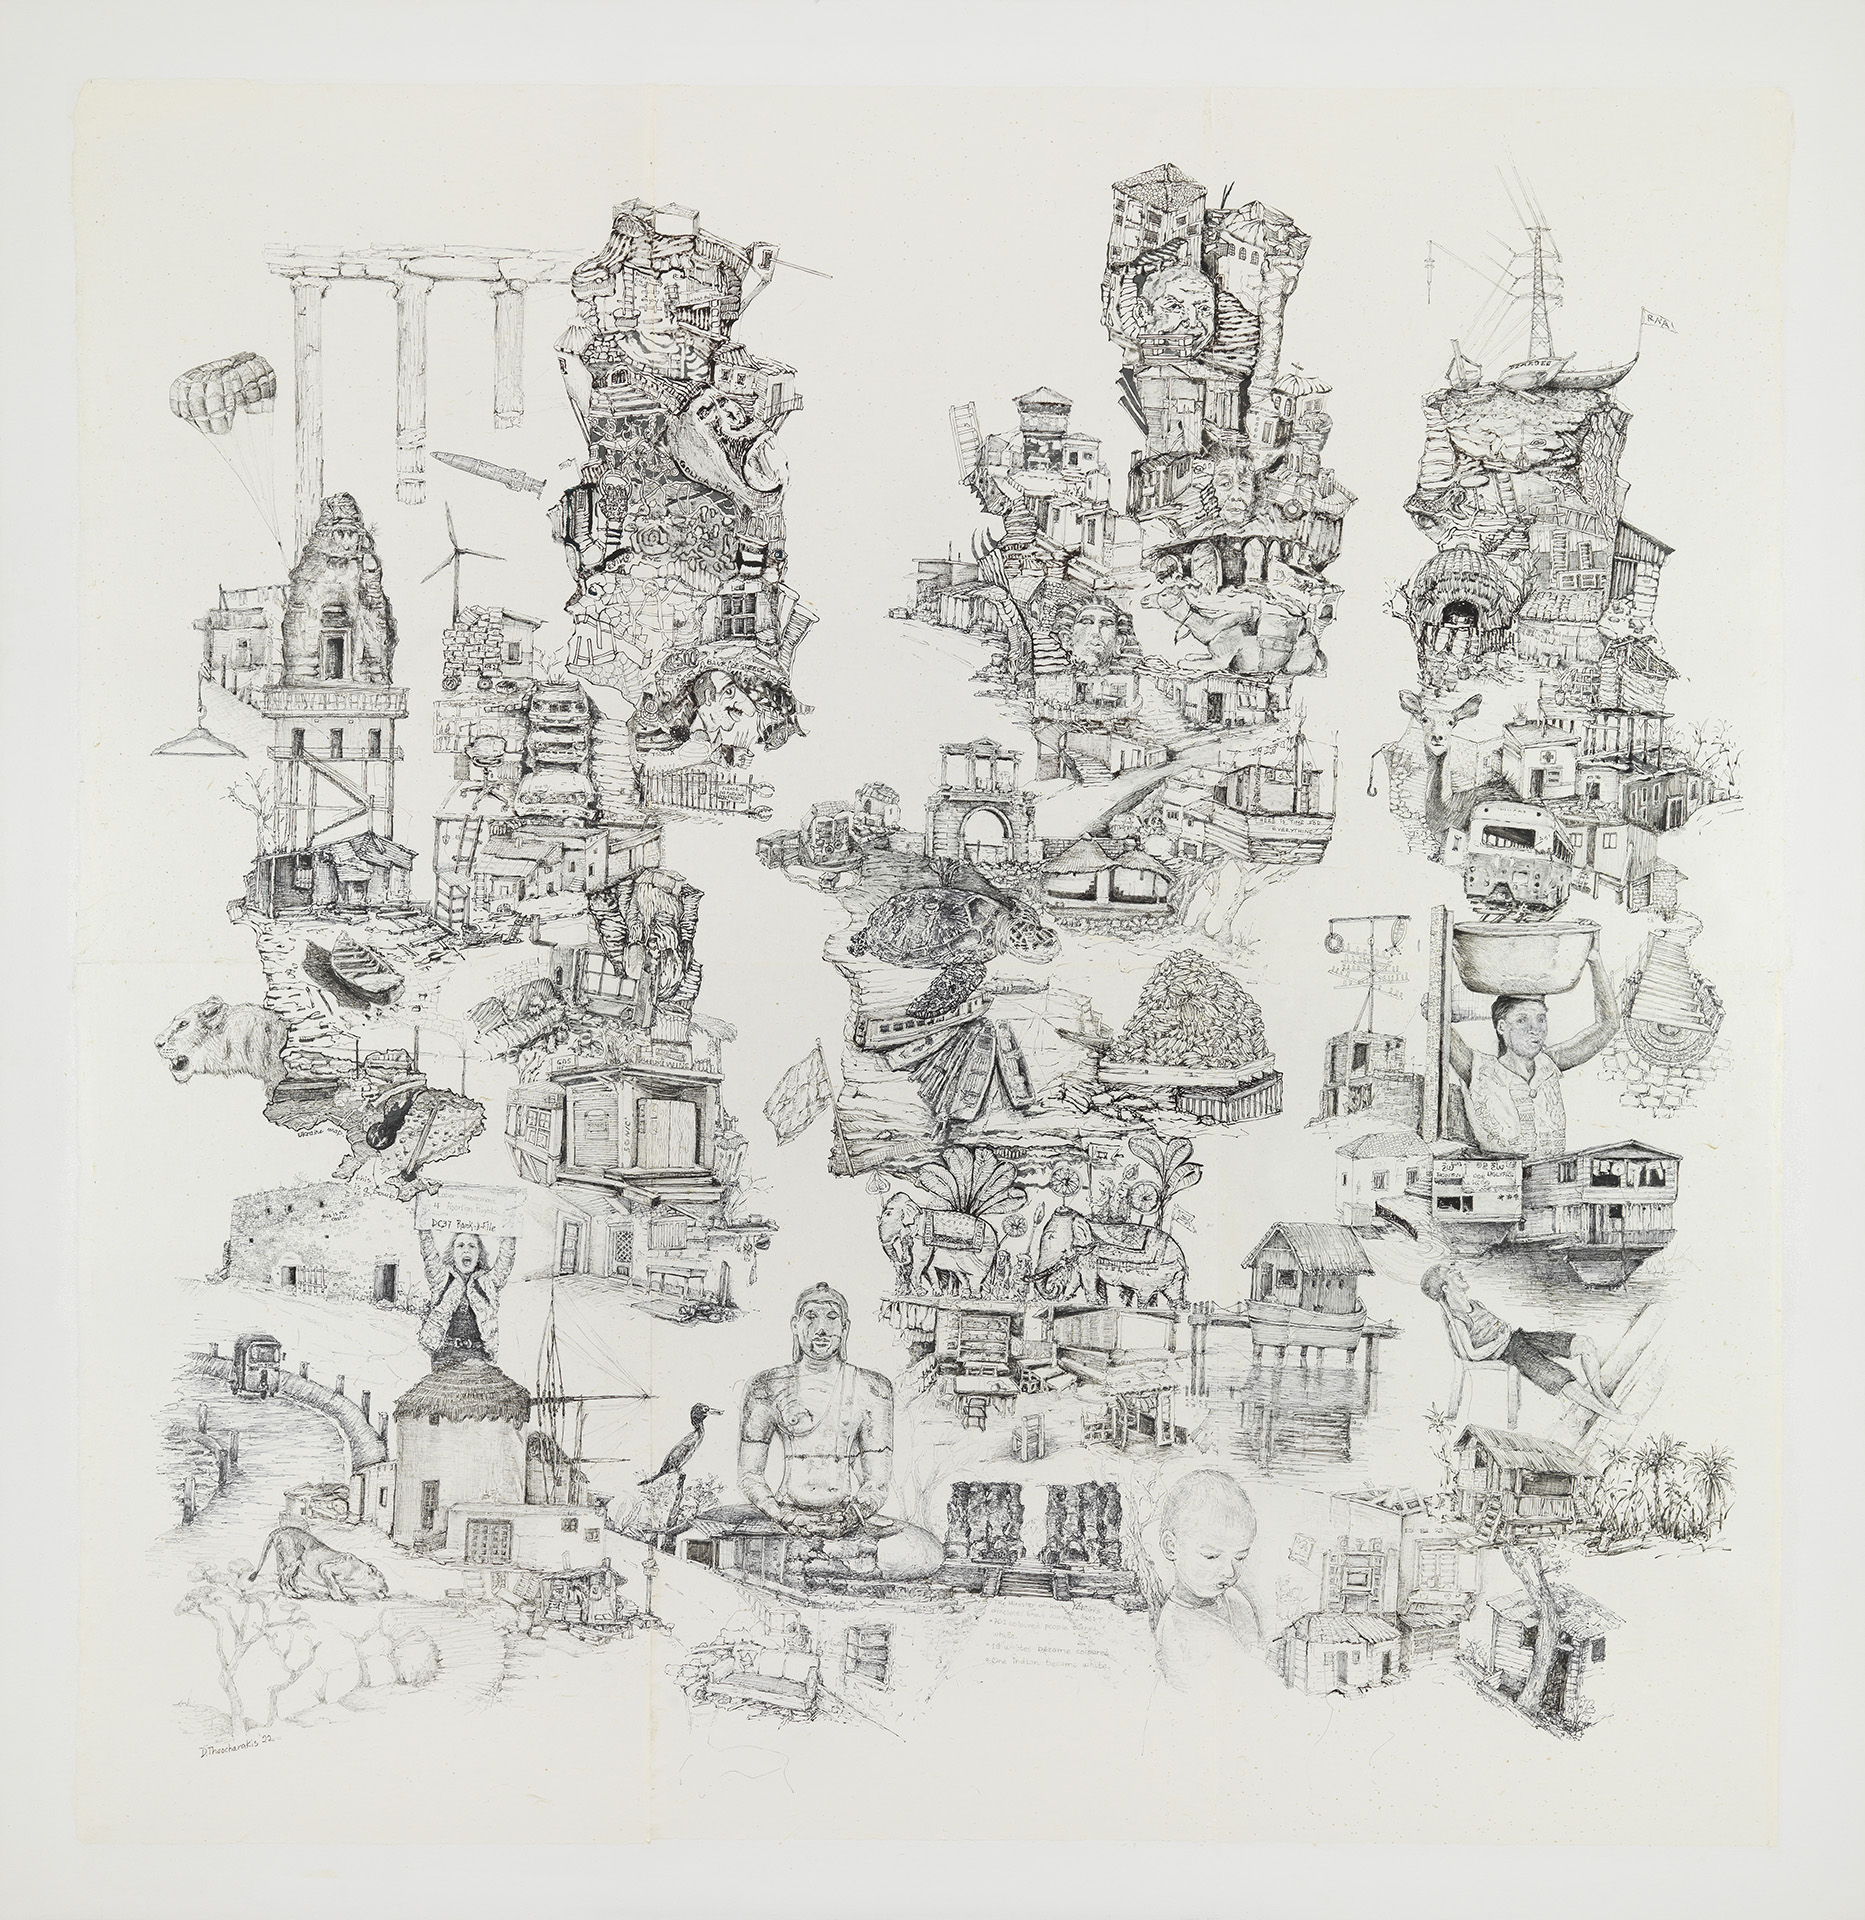 2022 | ink on handmade rice paper | 175 x 170 cm (68.9 x 66.9 in)